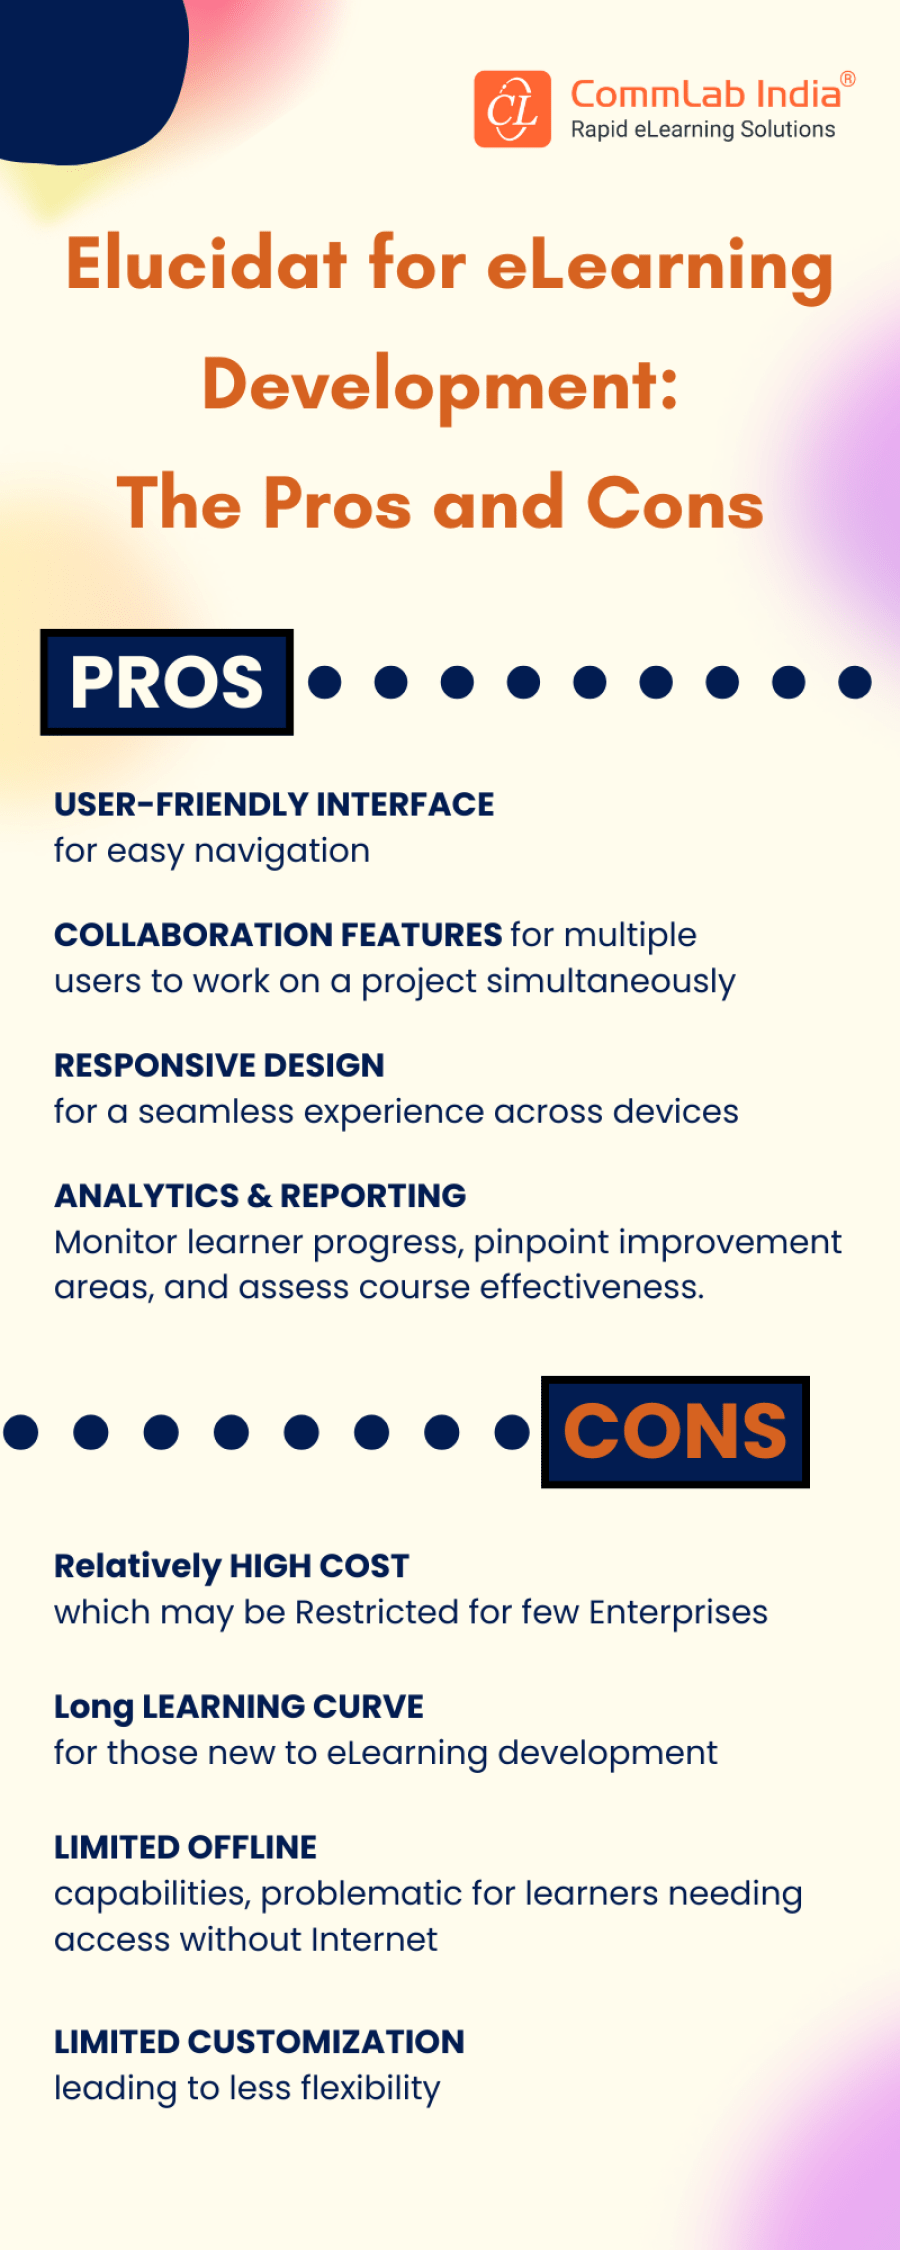 Elucidat for eLearning Development_The Pros and Cons